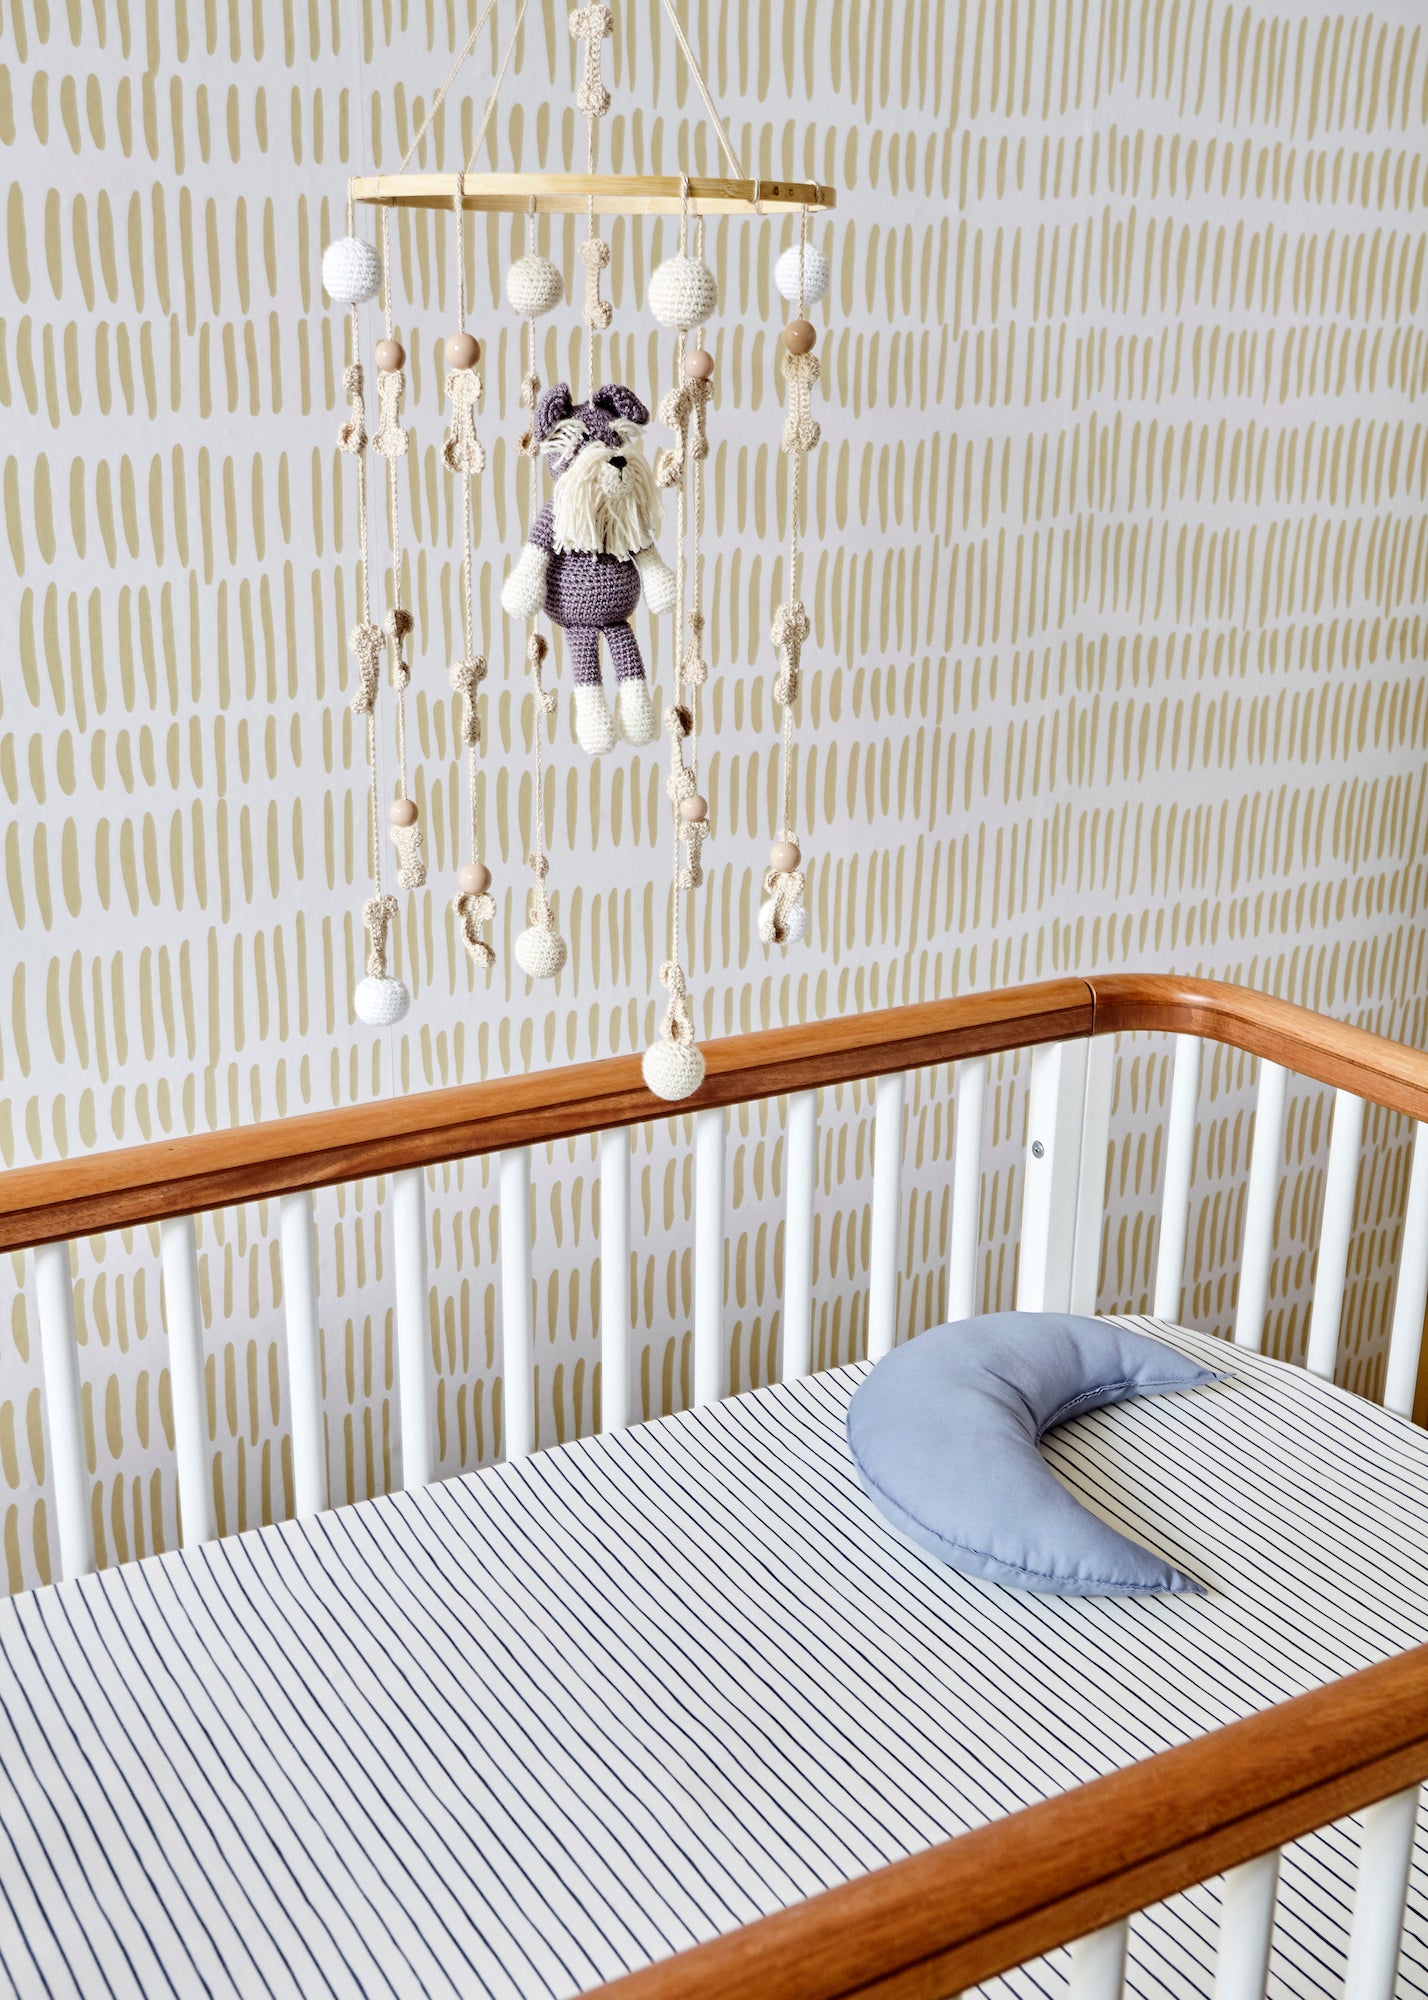 Organic Crib Sheets: How Does Your Baby Benefit?